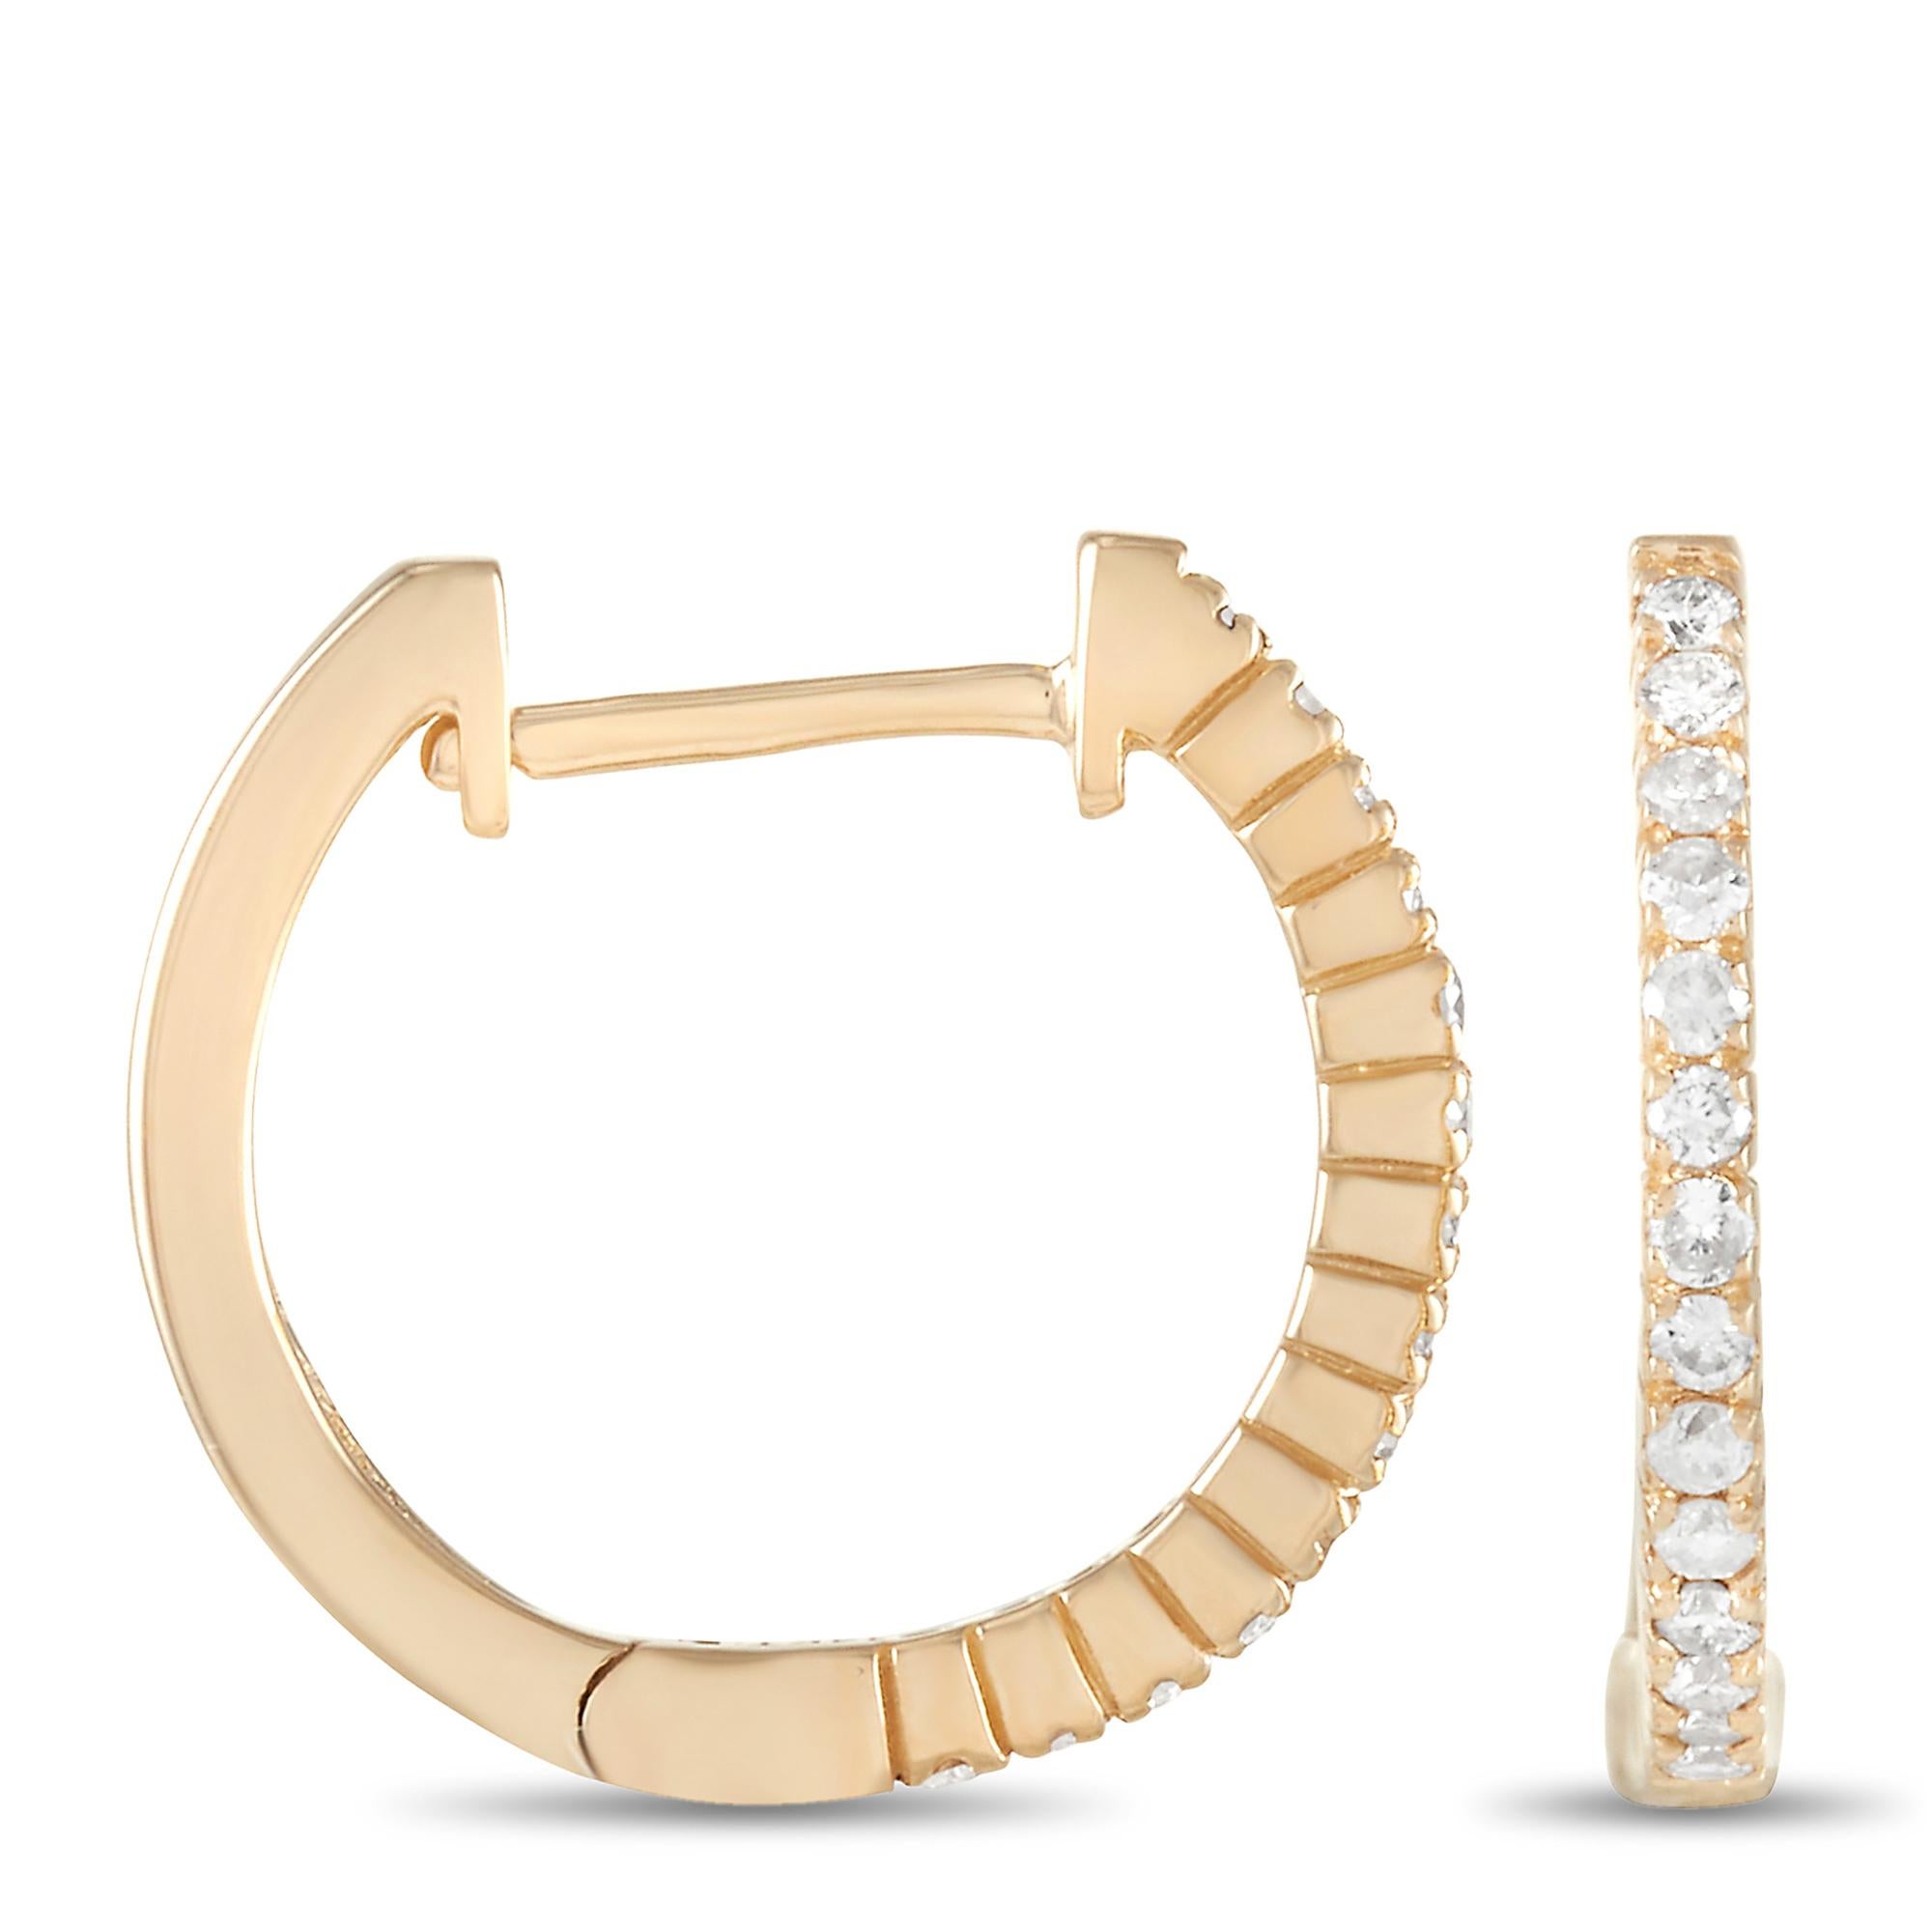 These diamond hoop earrings have undeniable charm. Measuring 0.57 inches round, each hoop comes to life thanks to a row of glittering gemstones set within a classic 14K yellow gold setting. Together they feature a total weight of 0.27 carats and